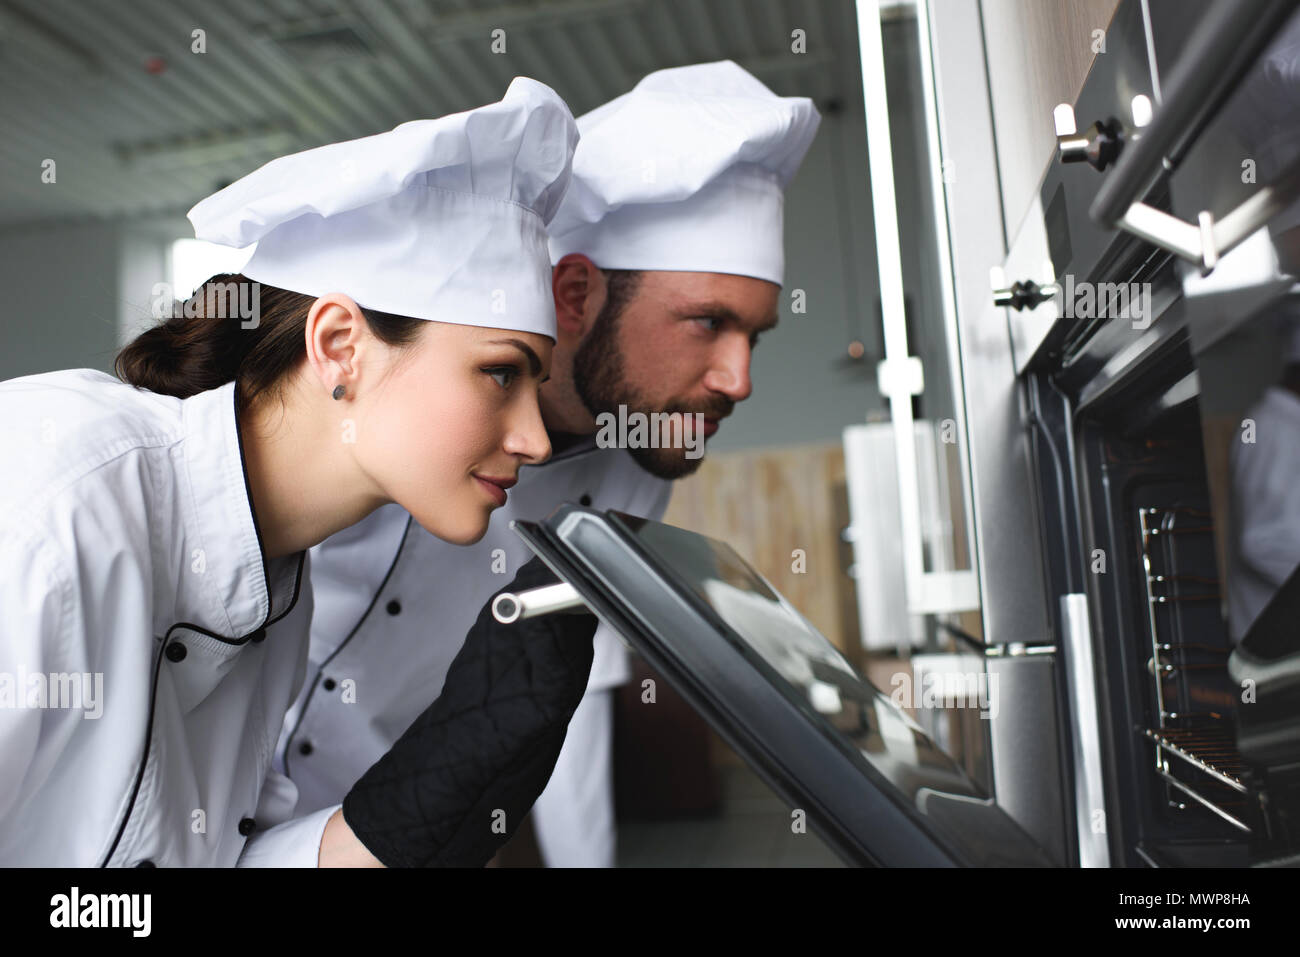 Professional chefs looking into modern kitchen oven Stock Photo